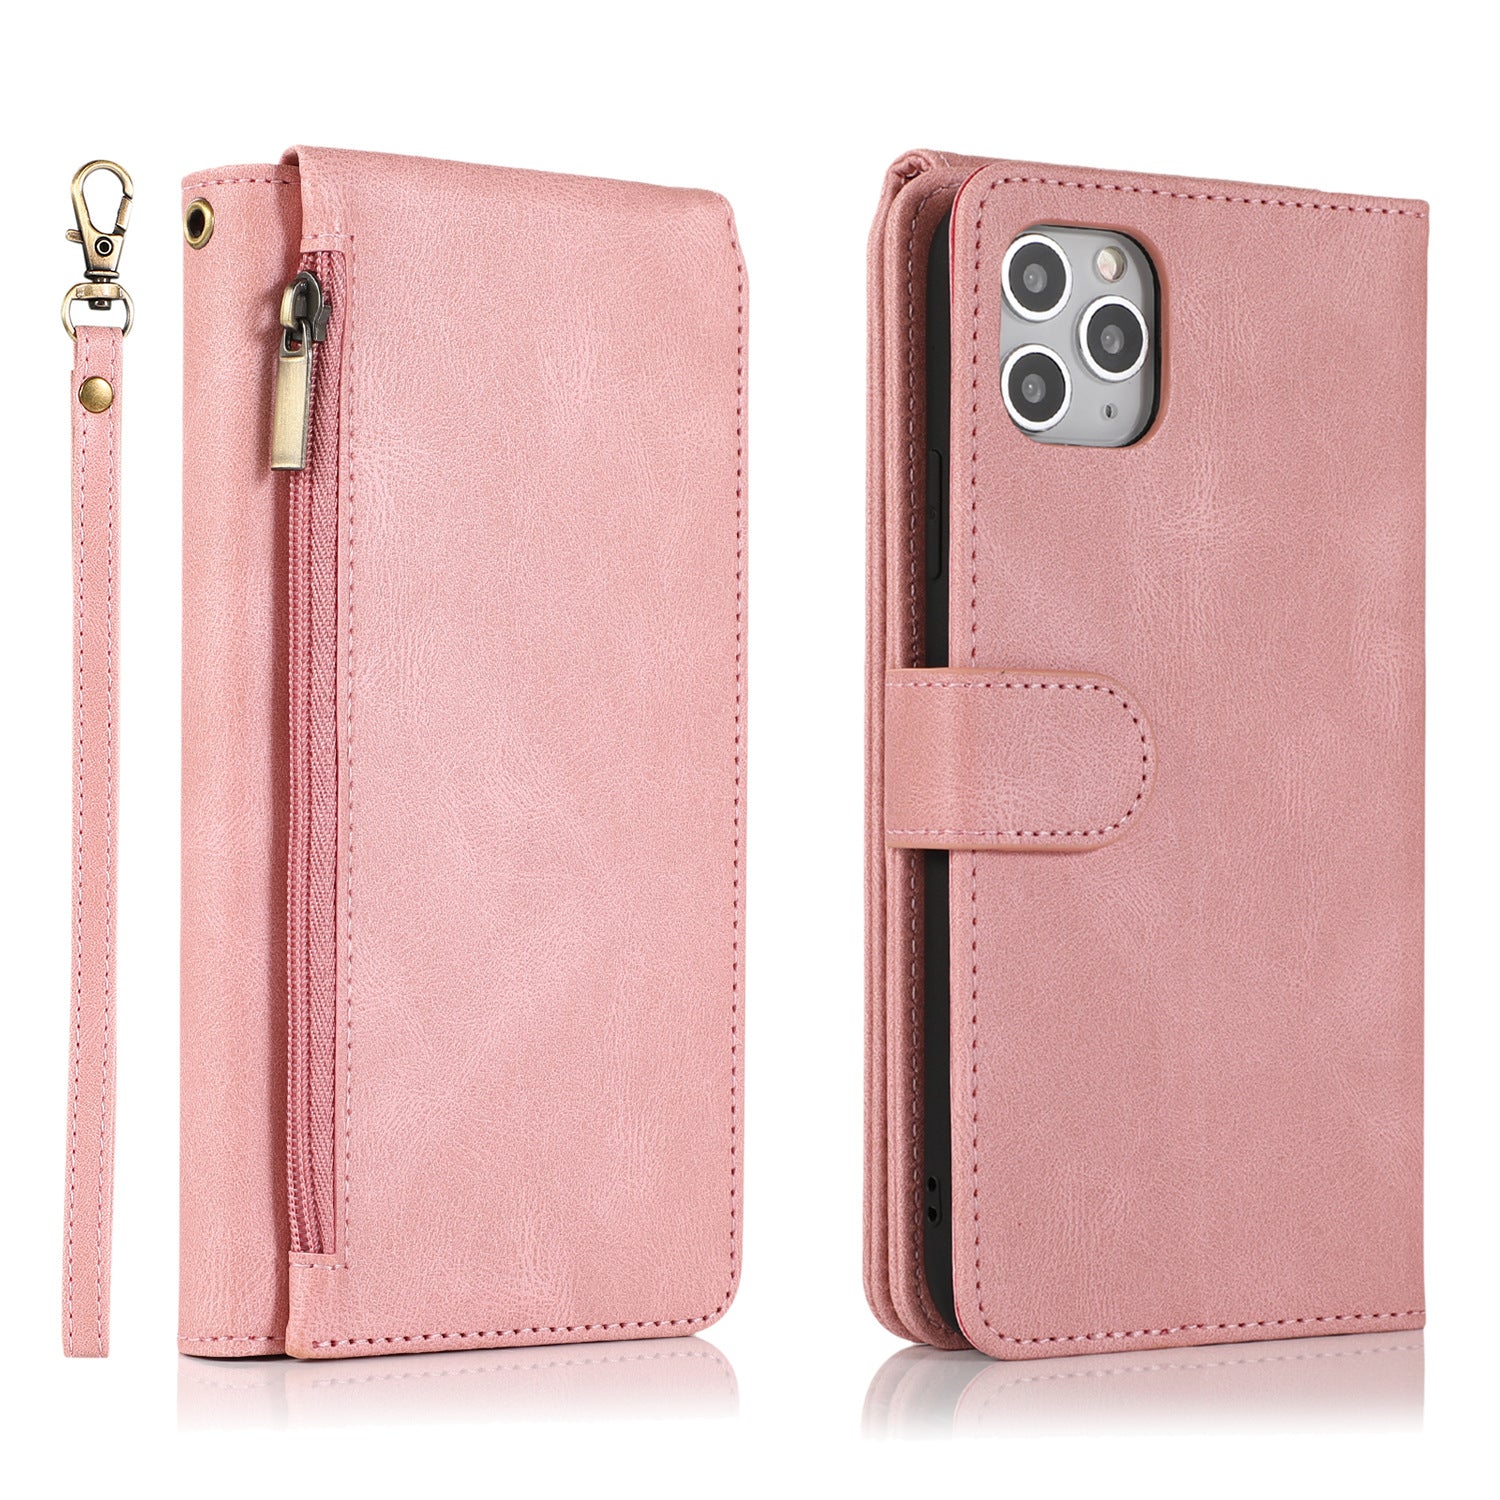 Protective Solid Color Multi Card Slots Phone Case Wallet with Built-in Kickstand for iPhone